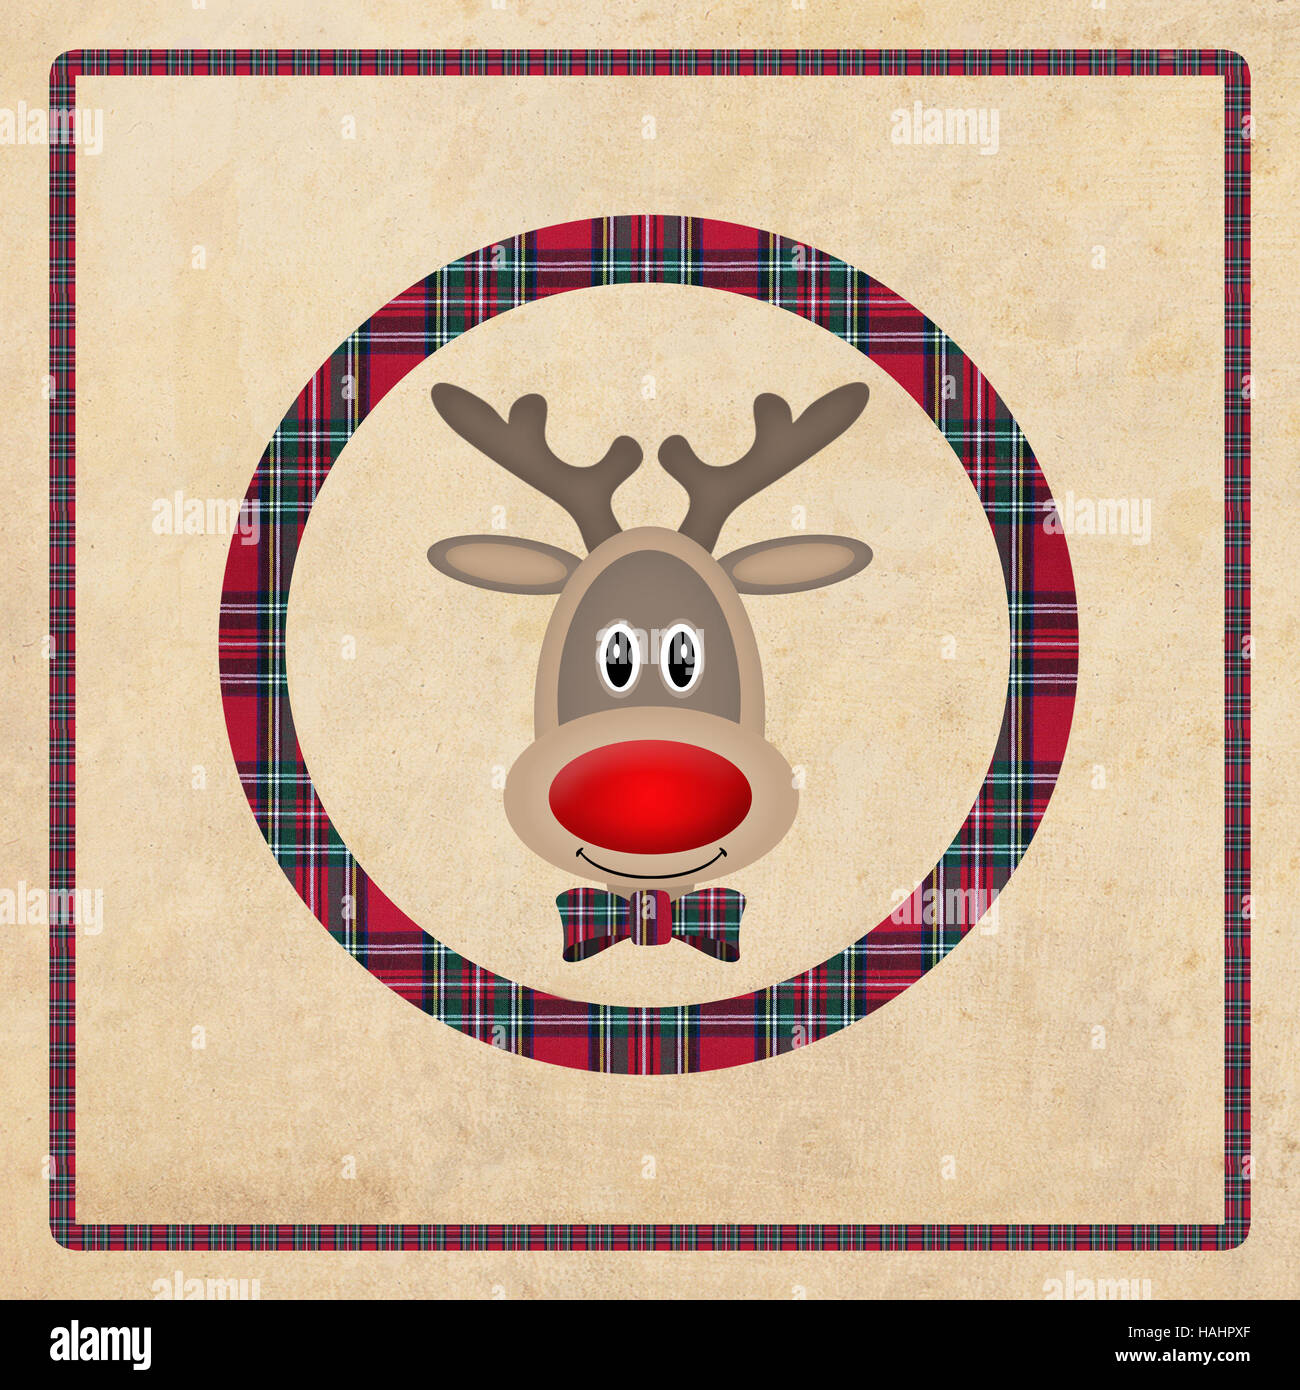 cute reindeer in circle with red plaid pattern, on old paper background, christmas card design Stock Photo